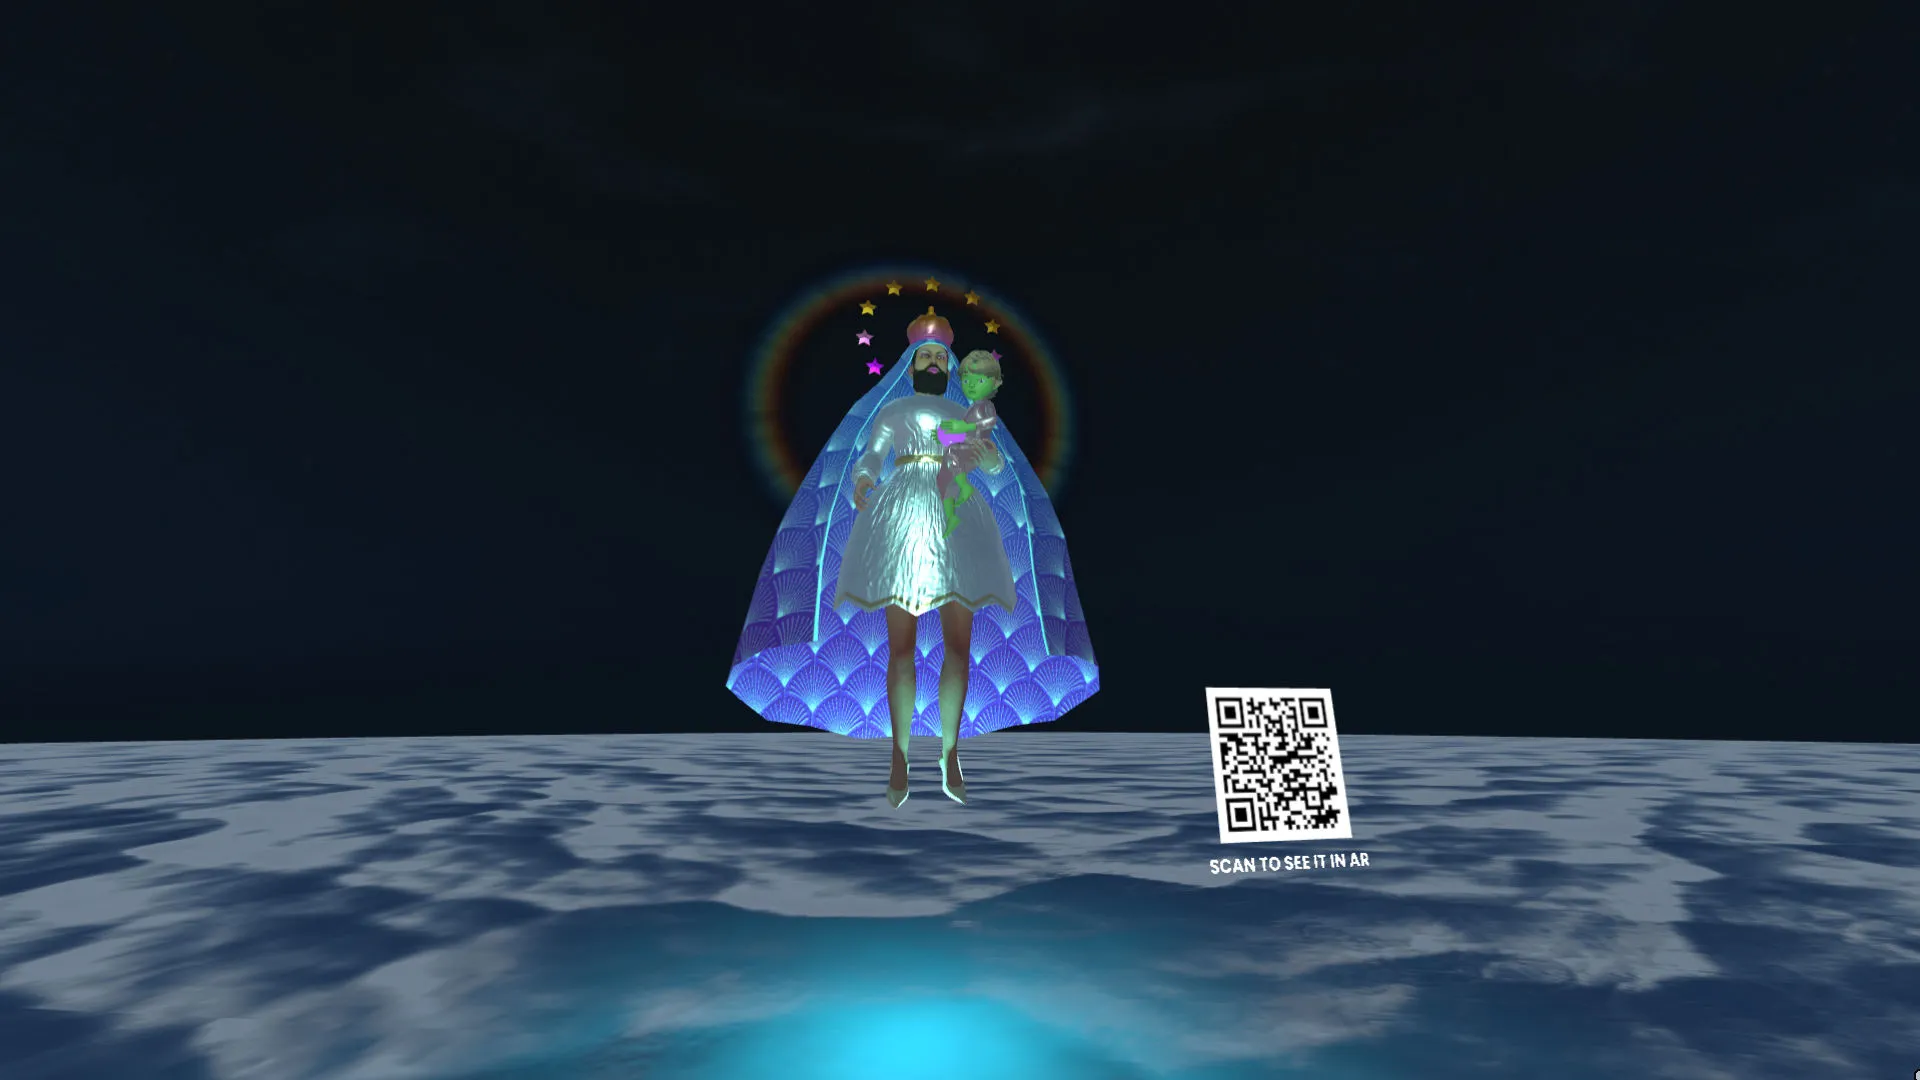 A depiction of a virgin in drag floating in an open sea, XR metaverse scene for the Dragvatar piece